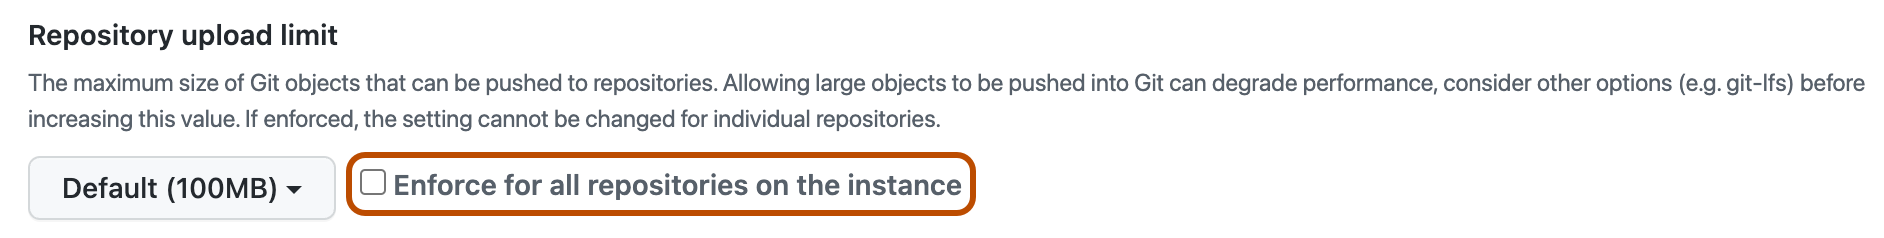 Screenshot of the "Repository upload limit" policy section. The "Enforce on all repositories" checkbox is highlighted with an orange outline.